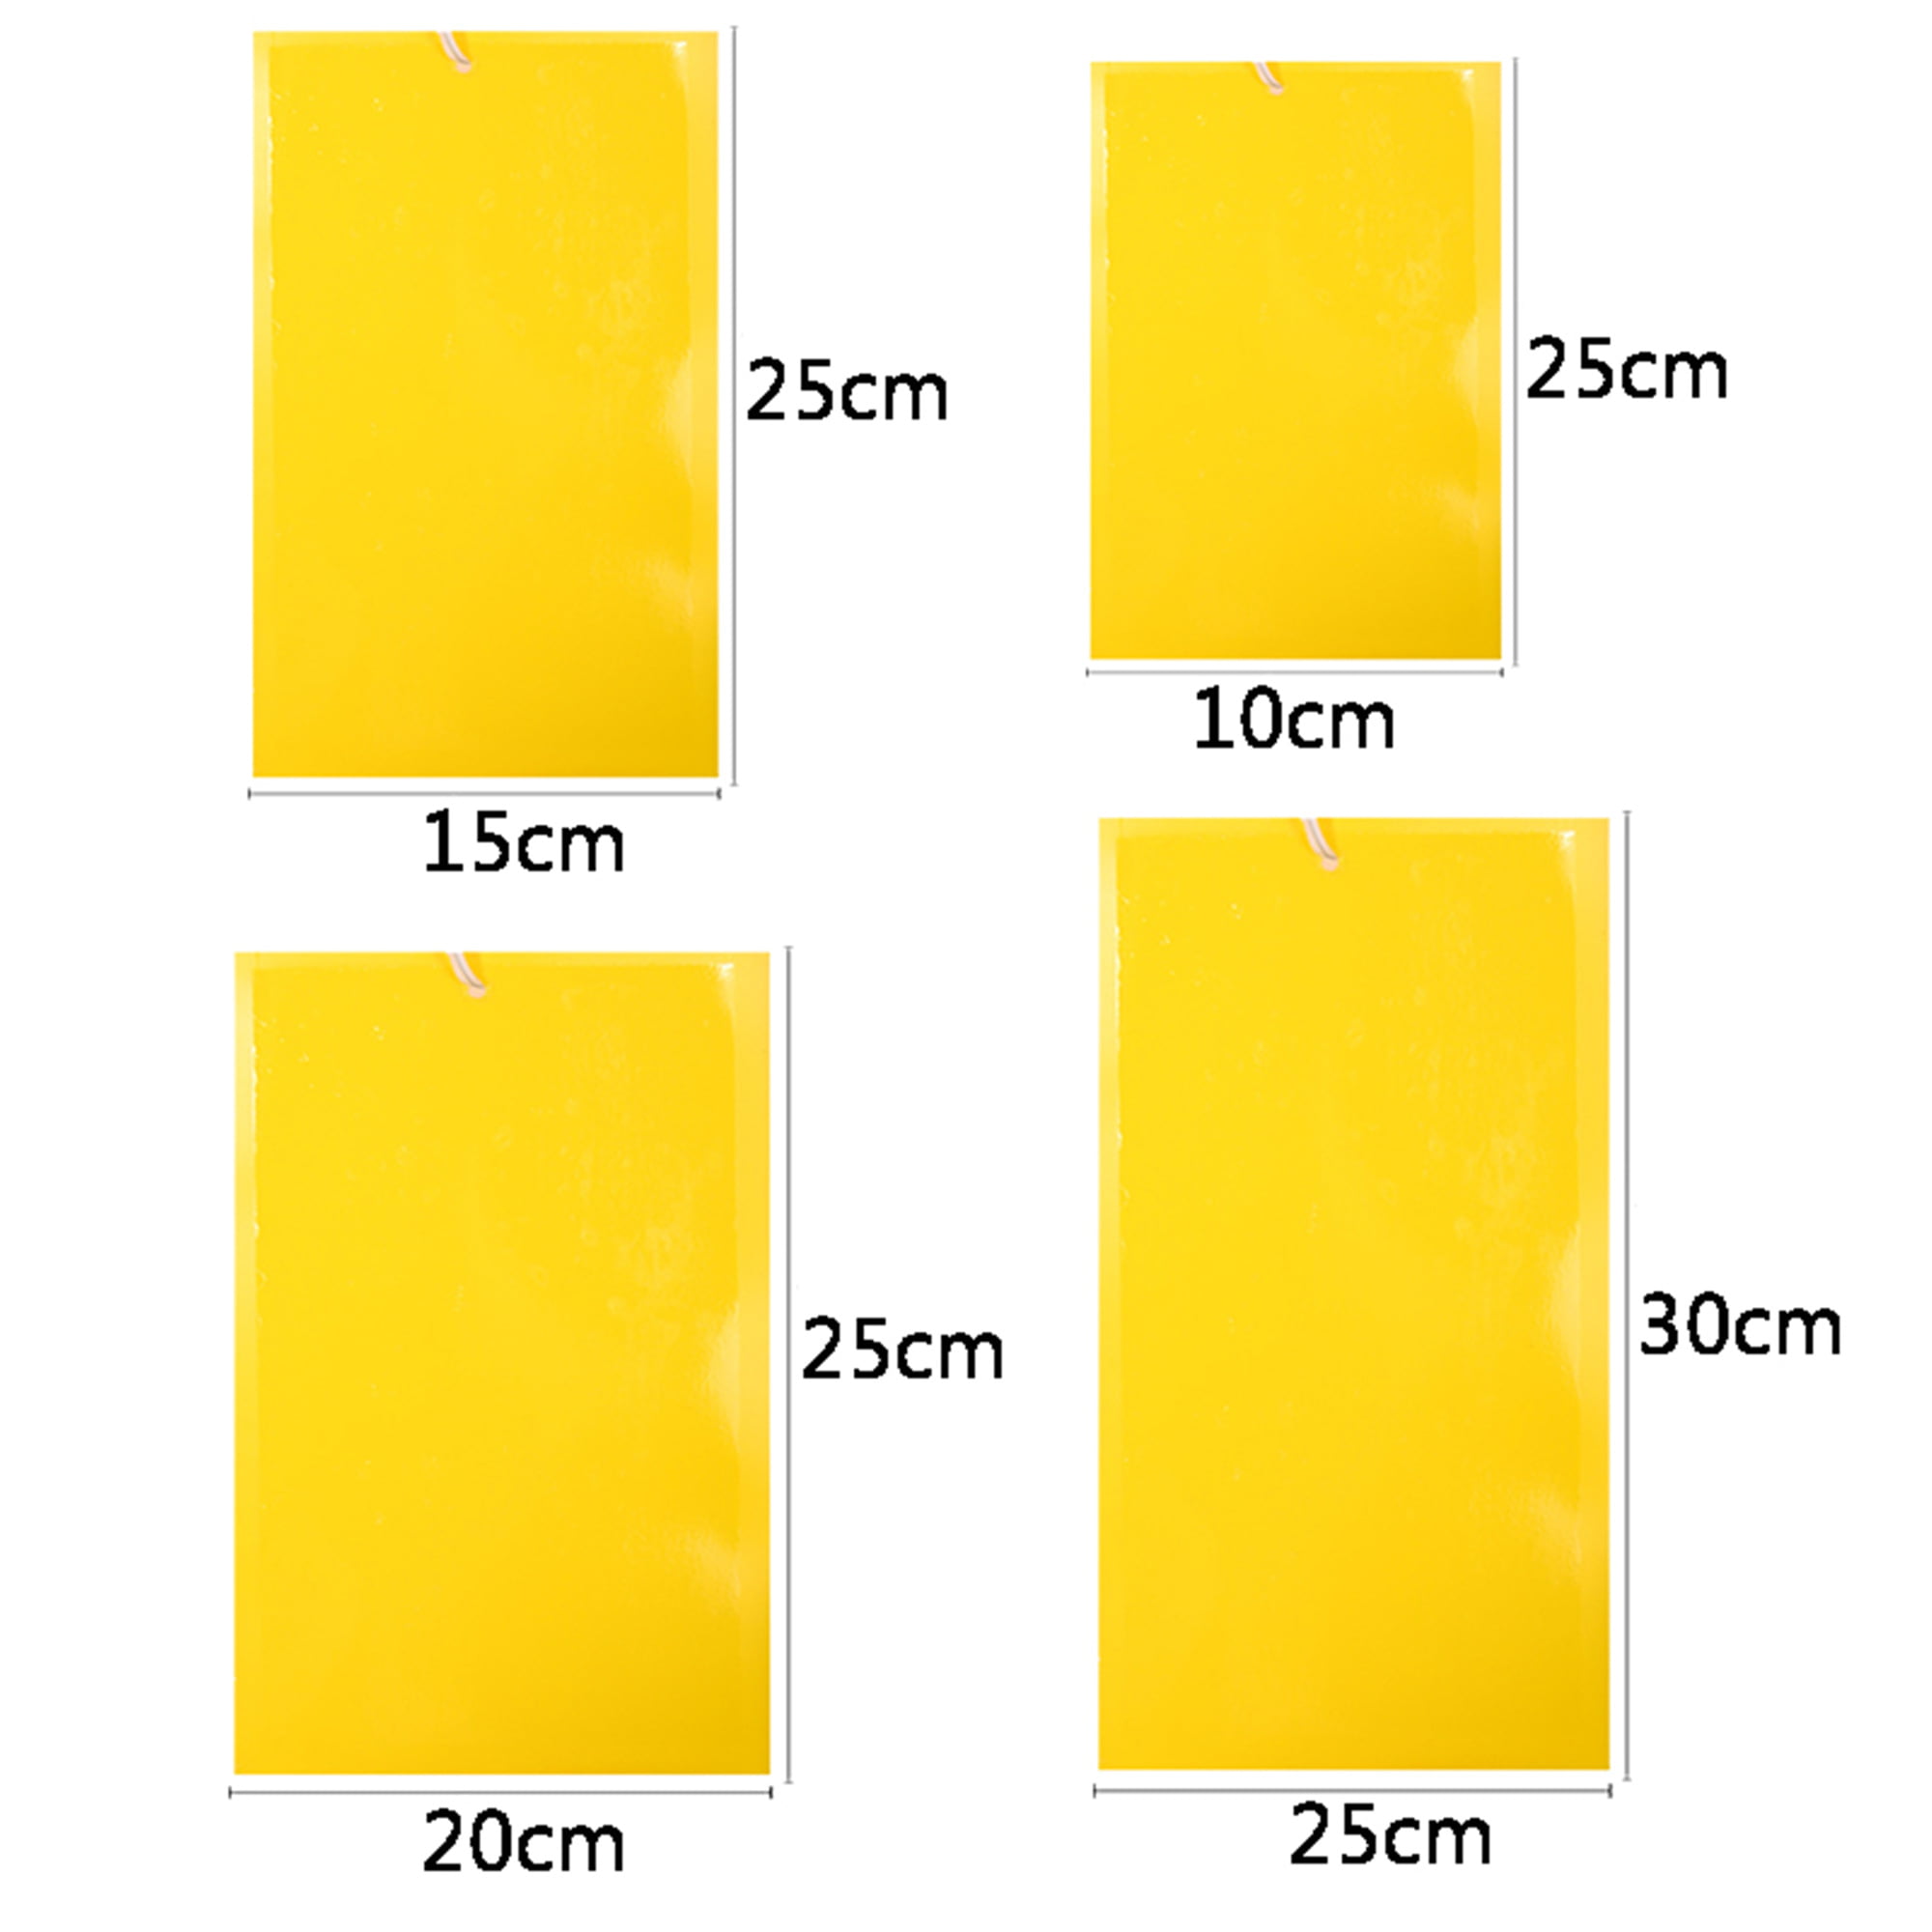 LIGHTSMAX 6 x 8 Yellow Sticky Traps for Flying Plant Insects Flies Gnats Whiteflies Aphids Pests - Yellow